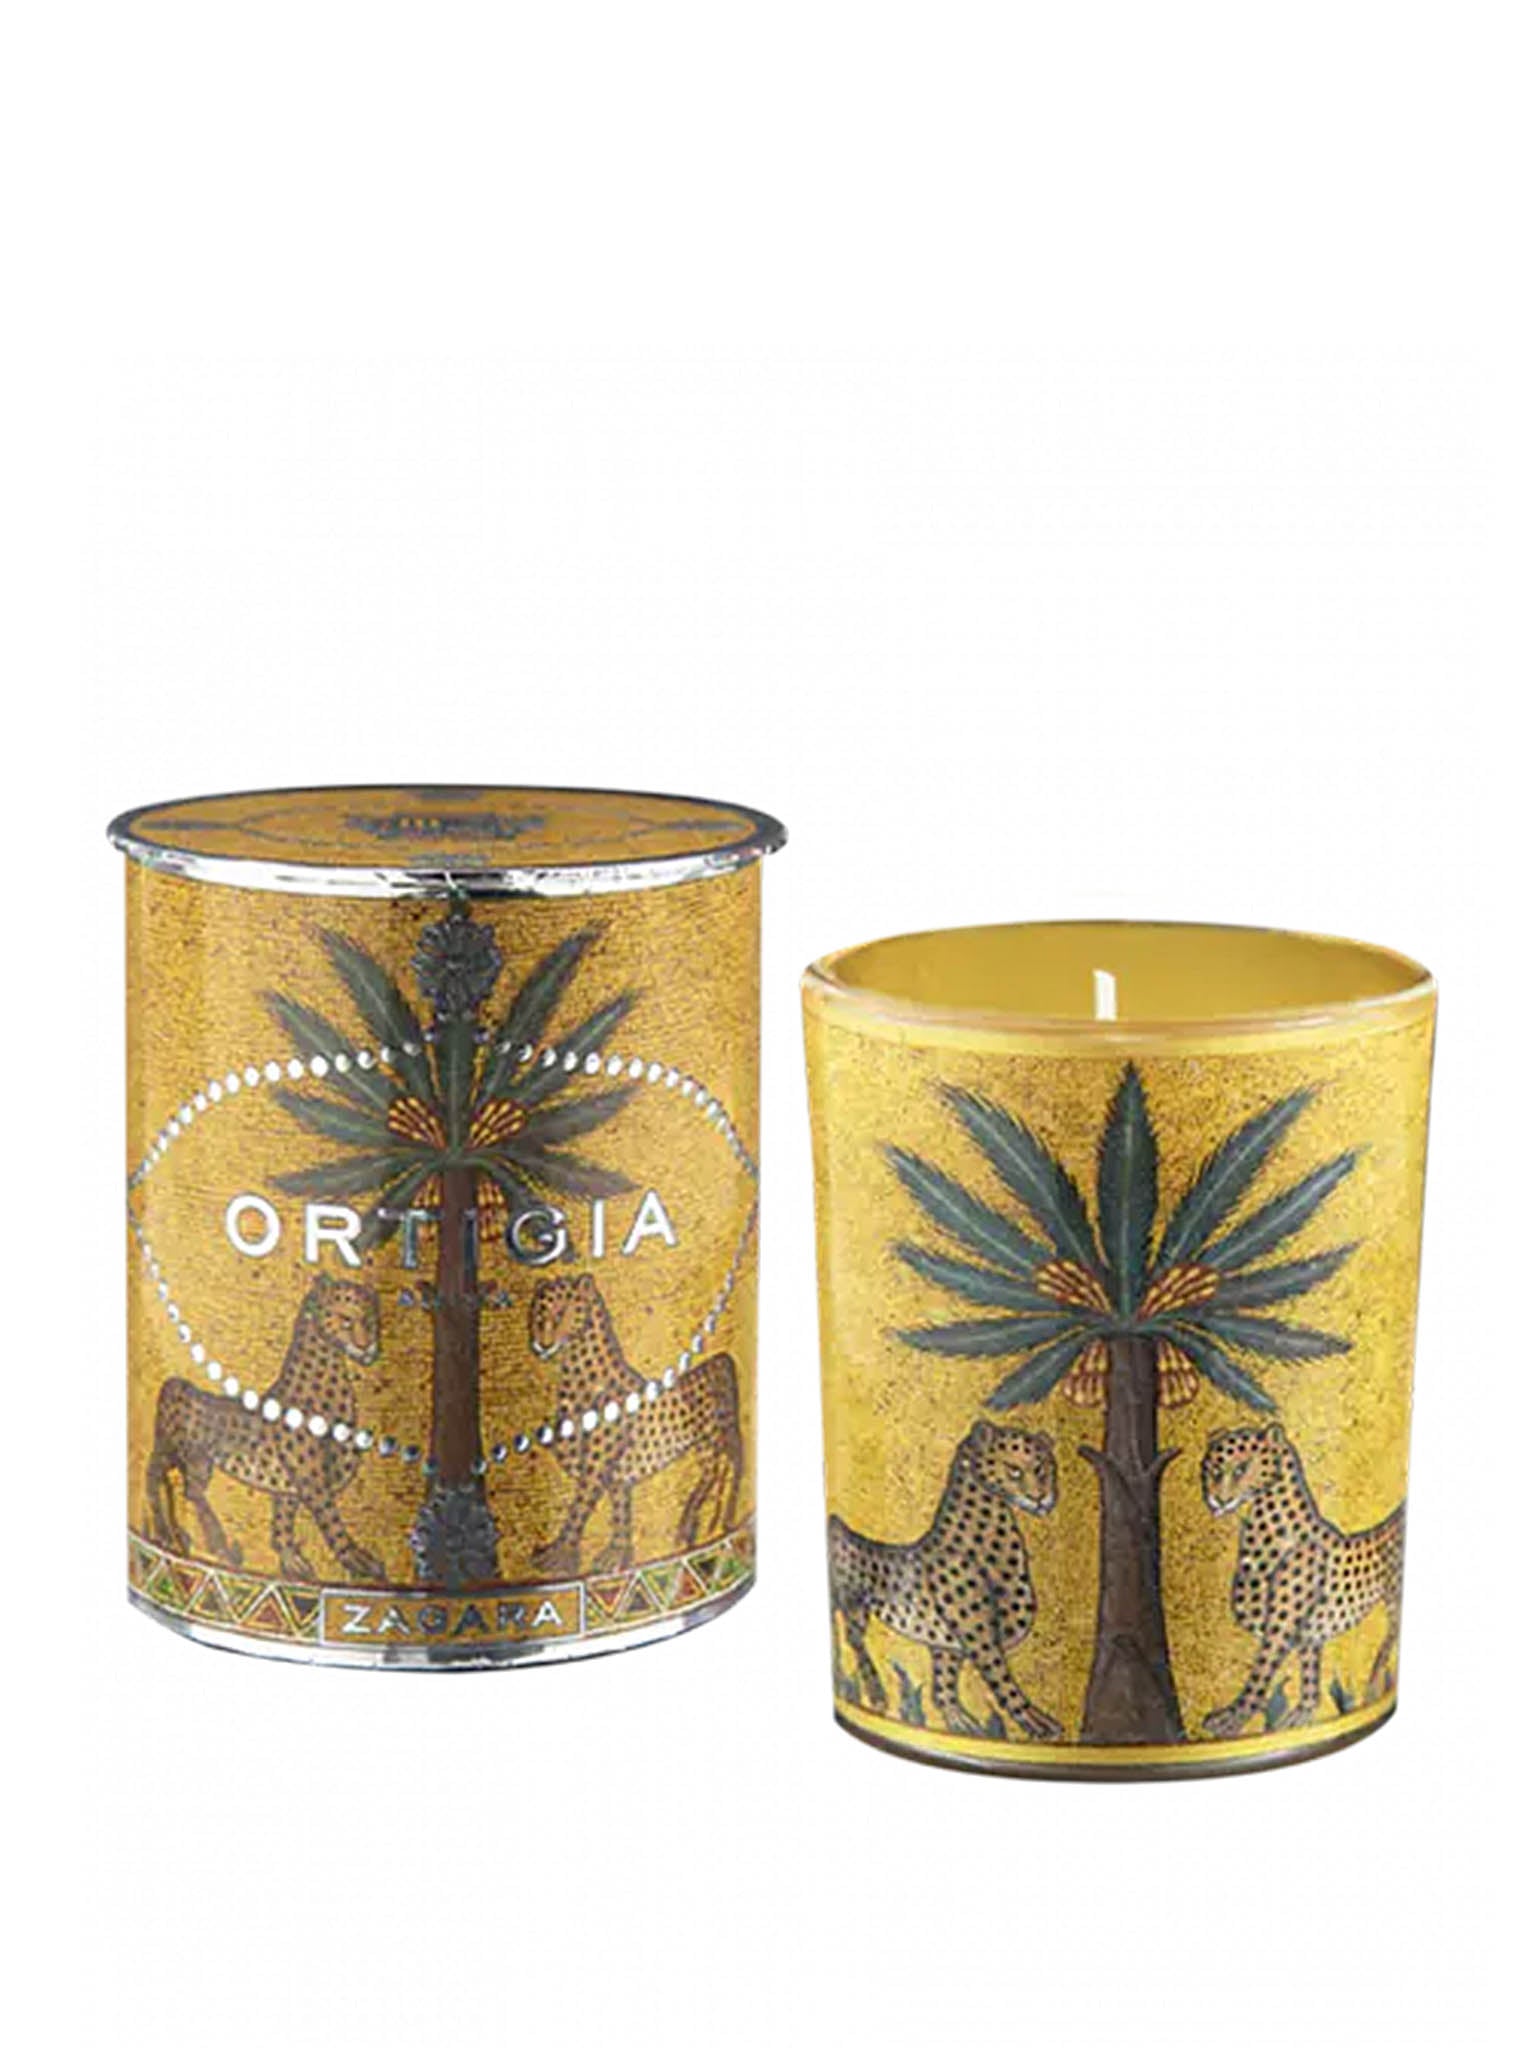 Ortigia Zagara Decorated Candle Cutout with packaging canister